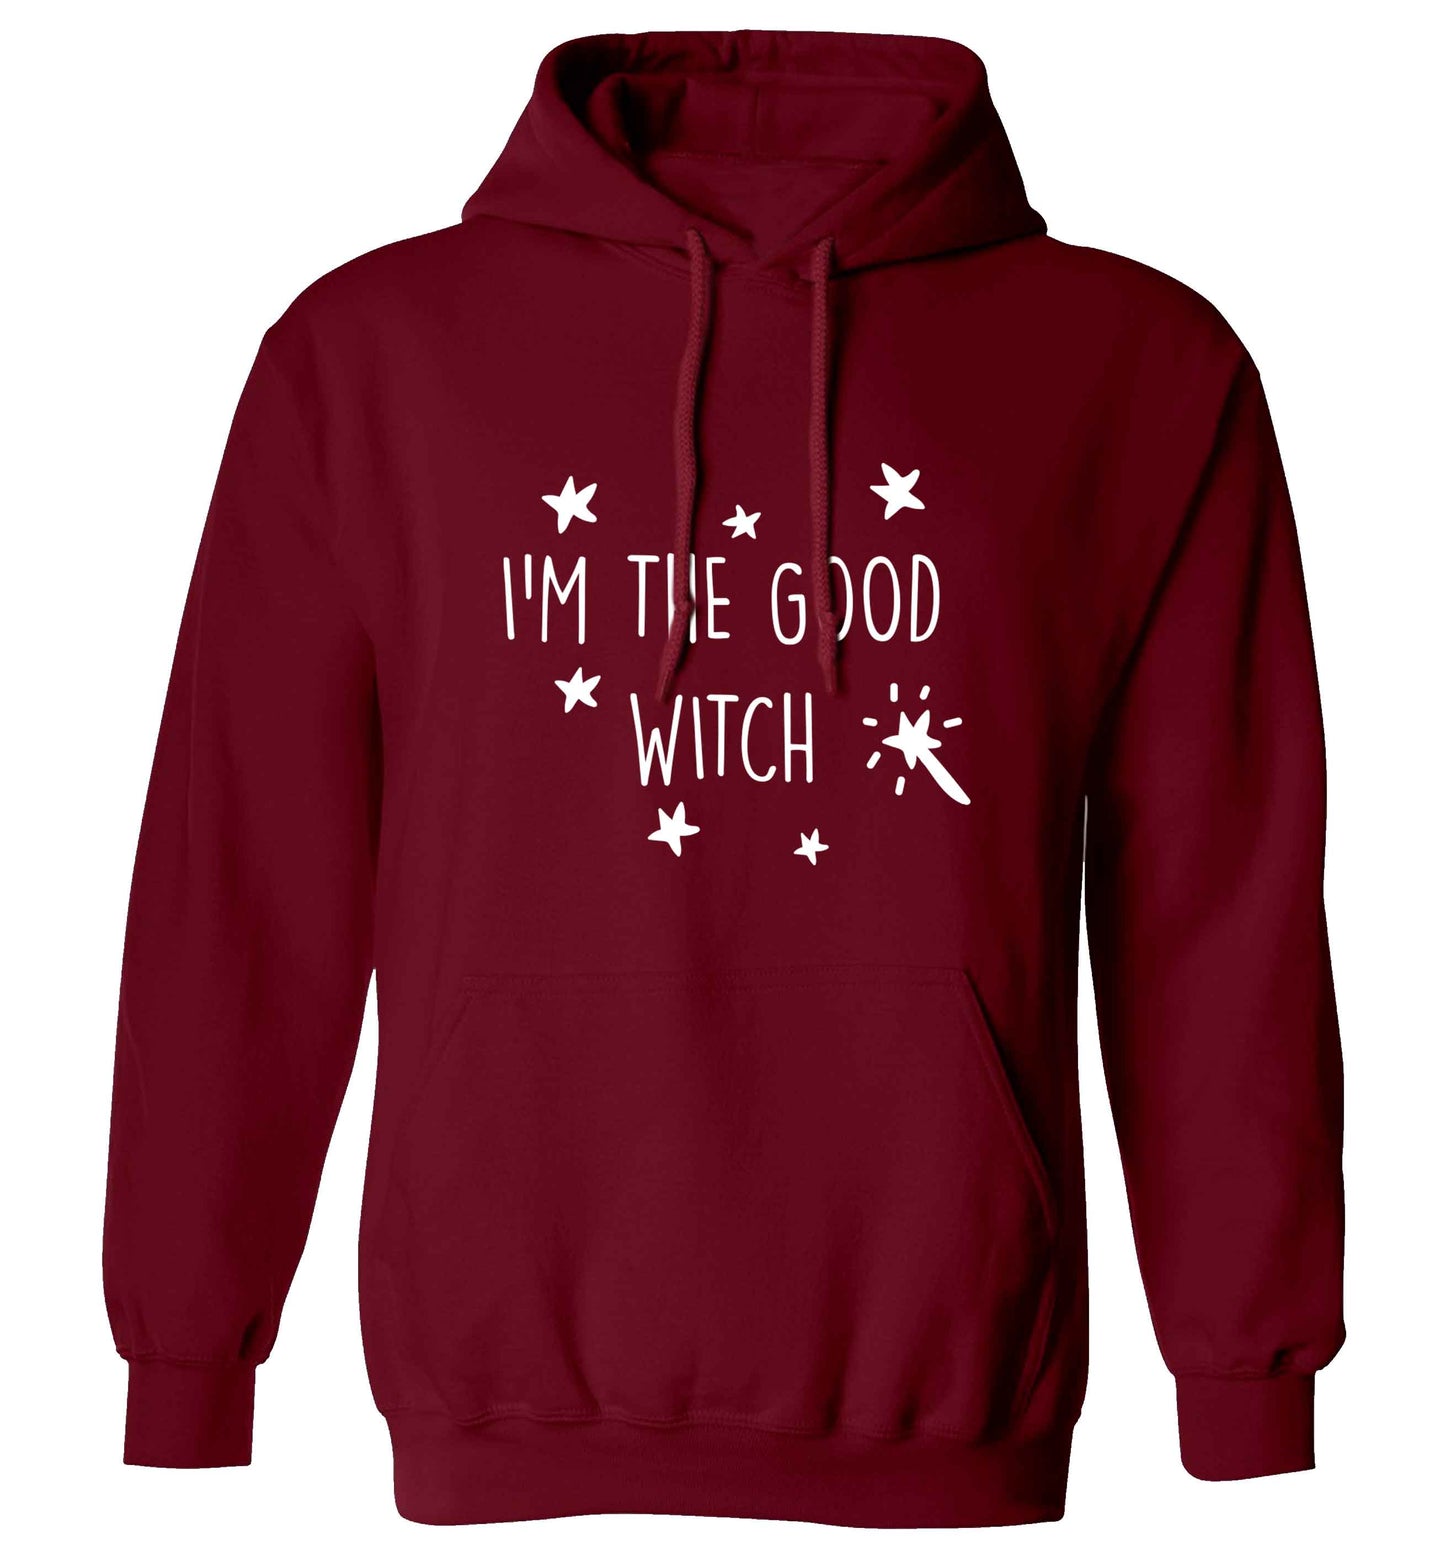 Good witch adults unisex maroon hoodie 2XL